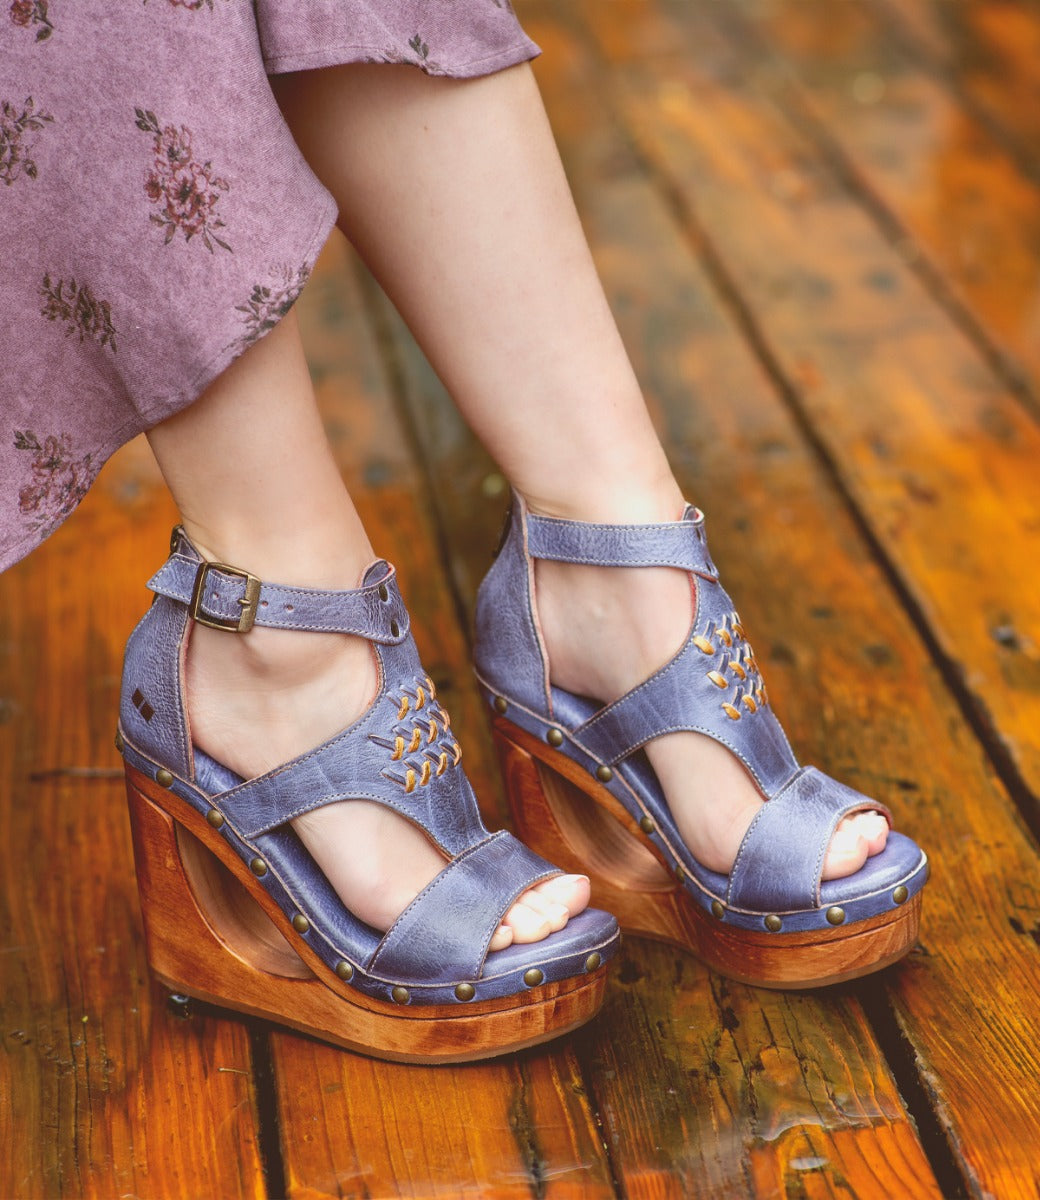 A woman is standing on a wooden deck wearing a pair of Bed Stu Millennial wedges.